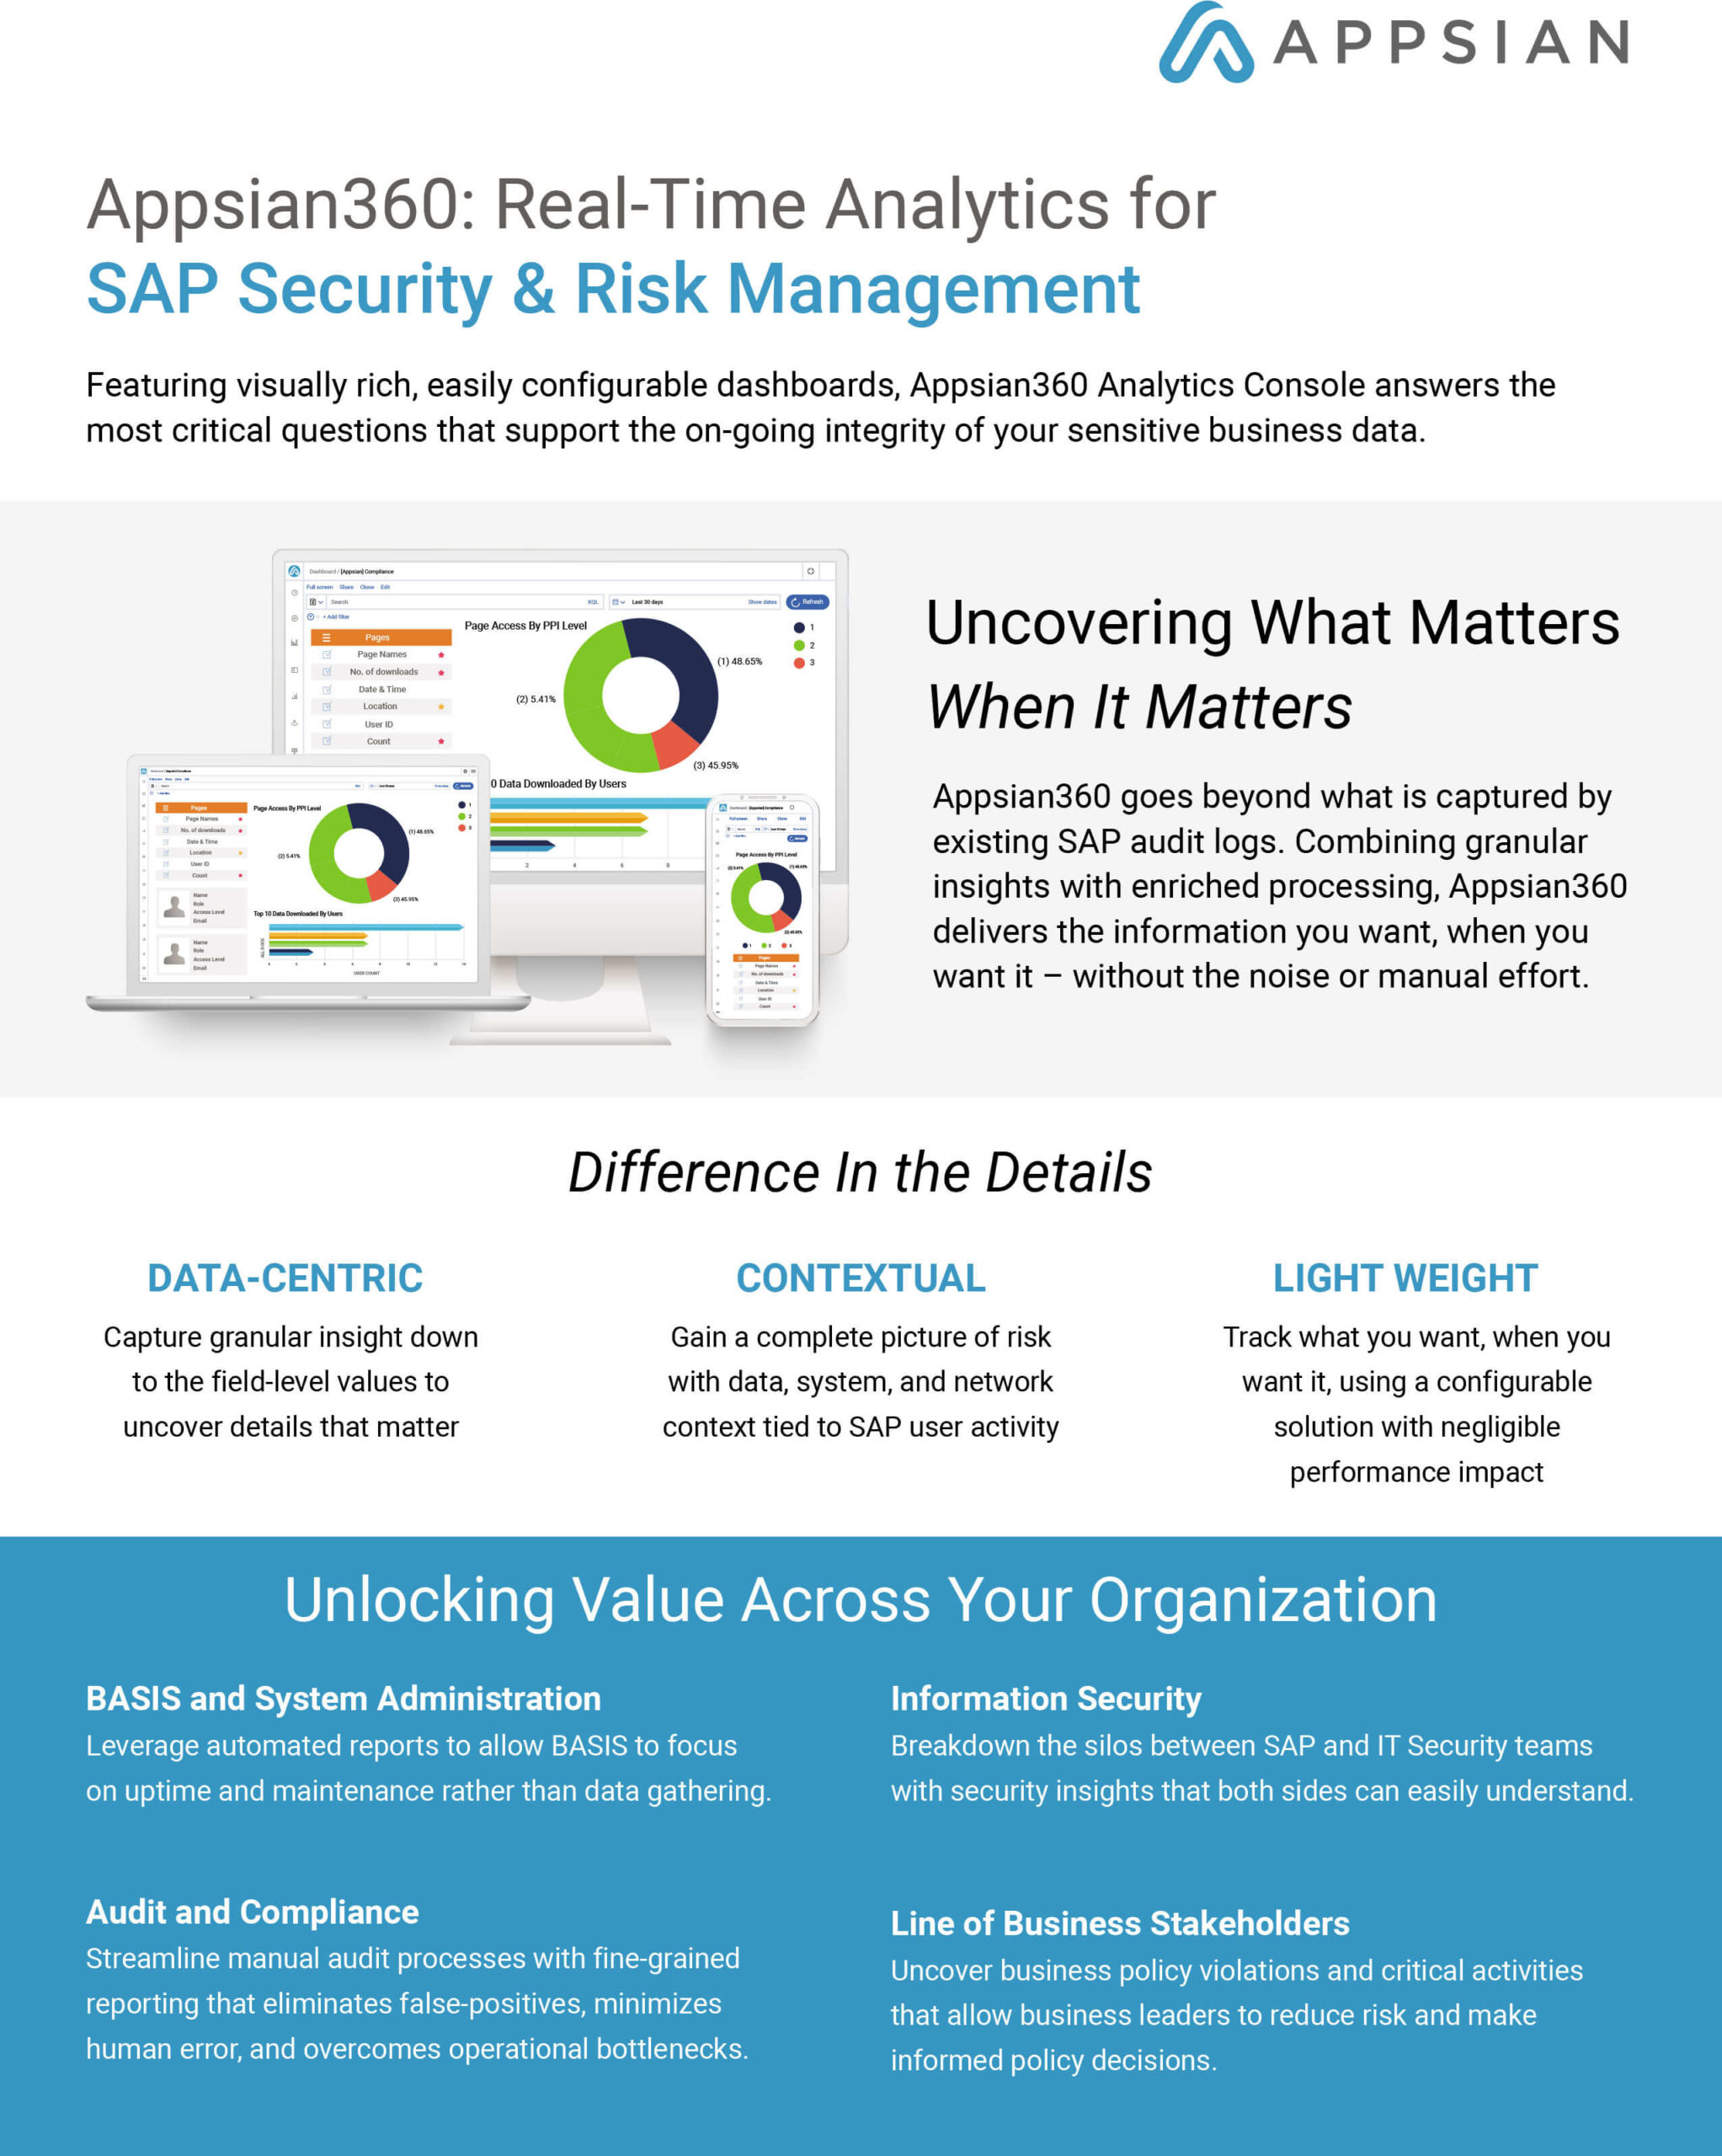 Appsian360 for SAP Security & Risk Management